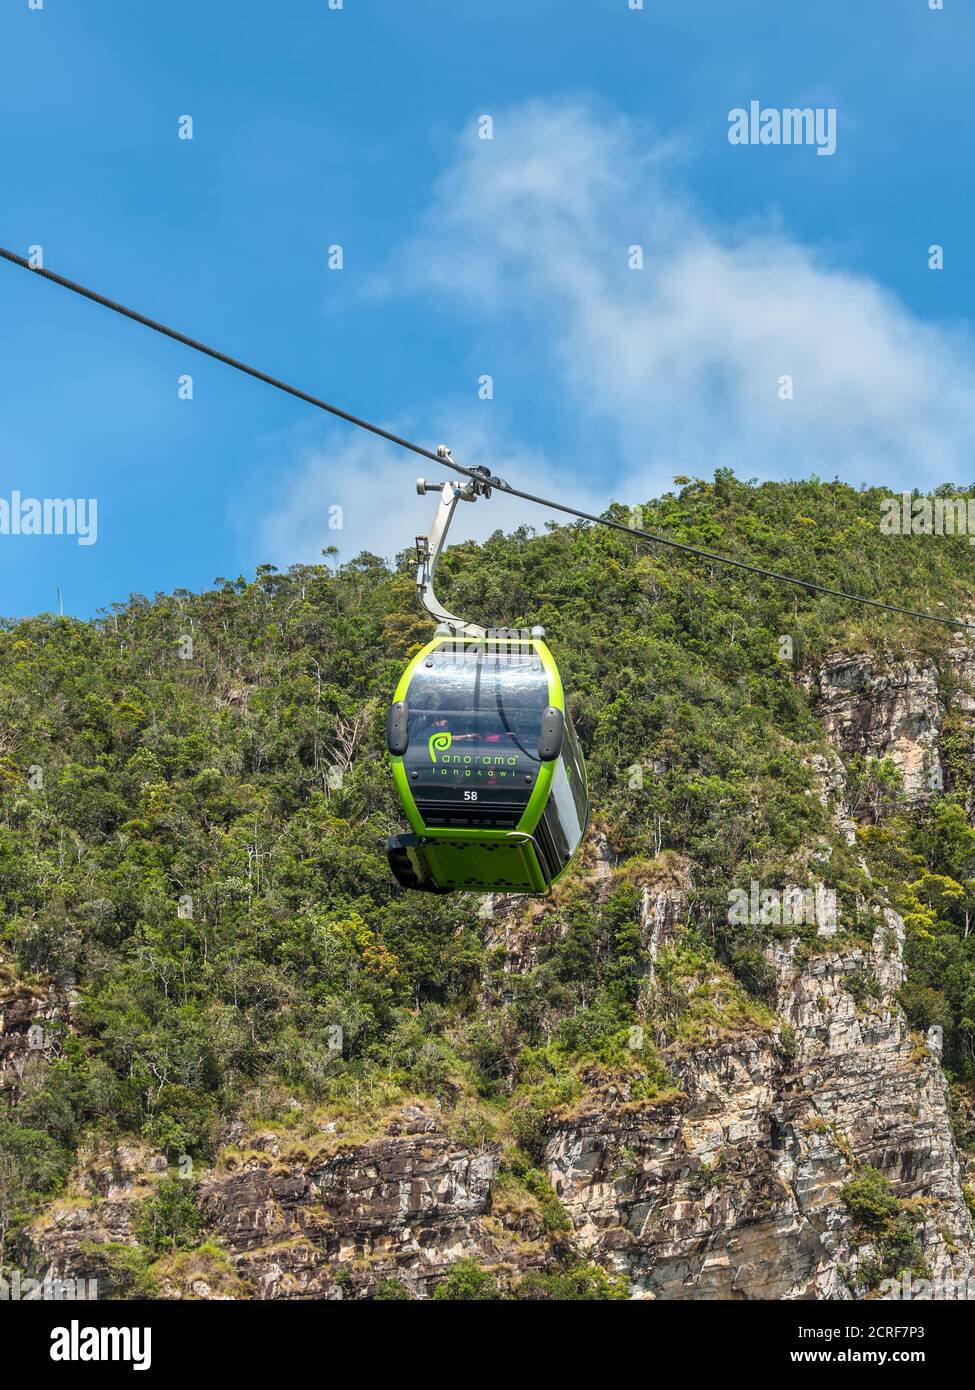 Langkawi, Malaysia - November 30, 2019: Cableway and Cable car cabin, is one of the major attractions in Langkawi Island, Kedah, Malaysia. Stock Photo